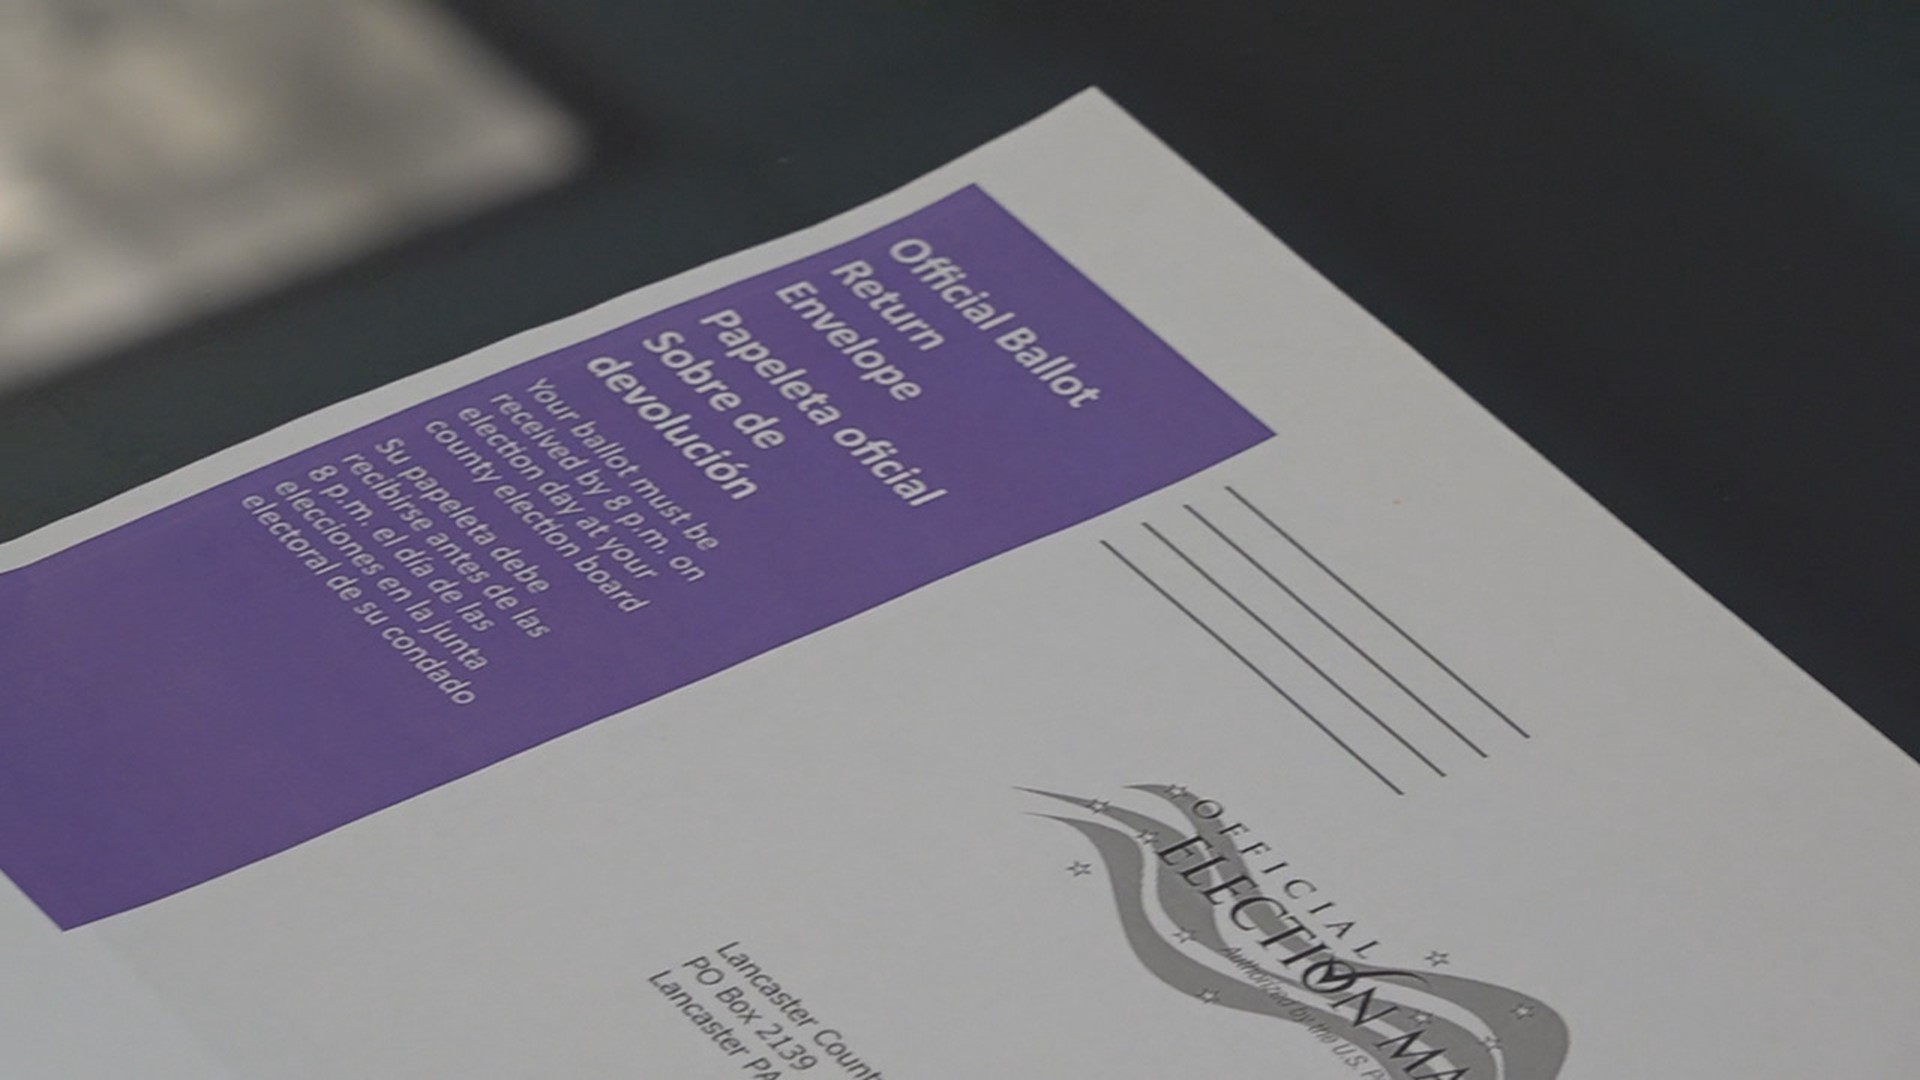 There are several different kinds of ballots that voters can use to get their votes counted and voices heard during Tuesday's primary election.